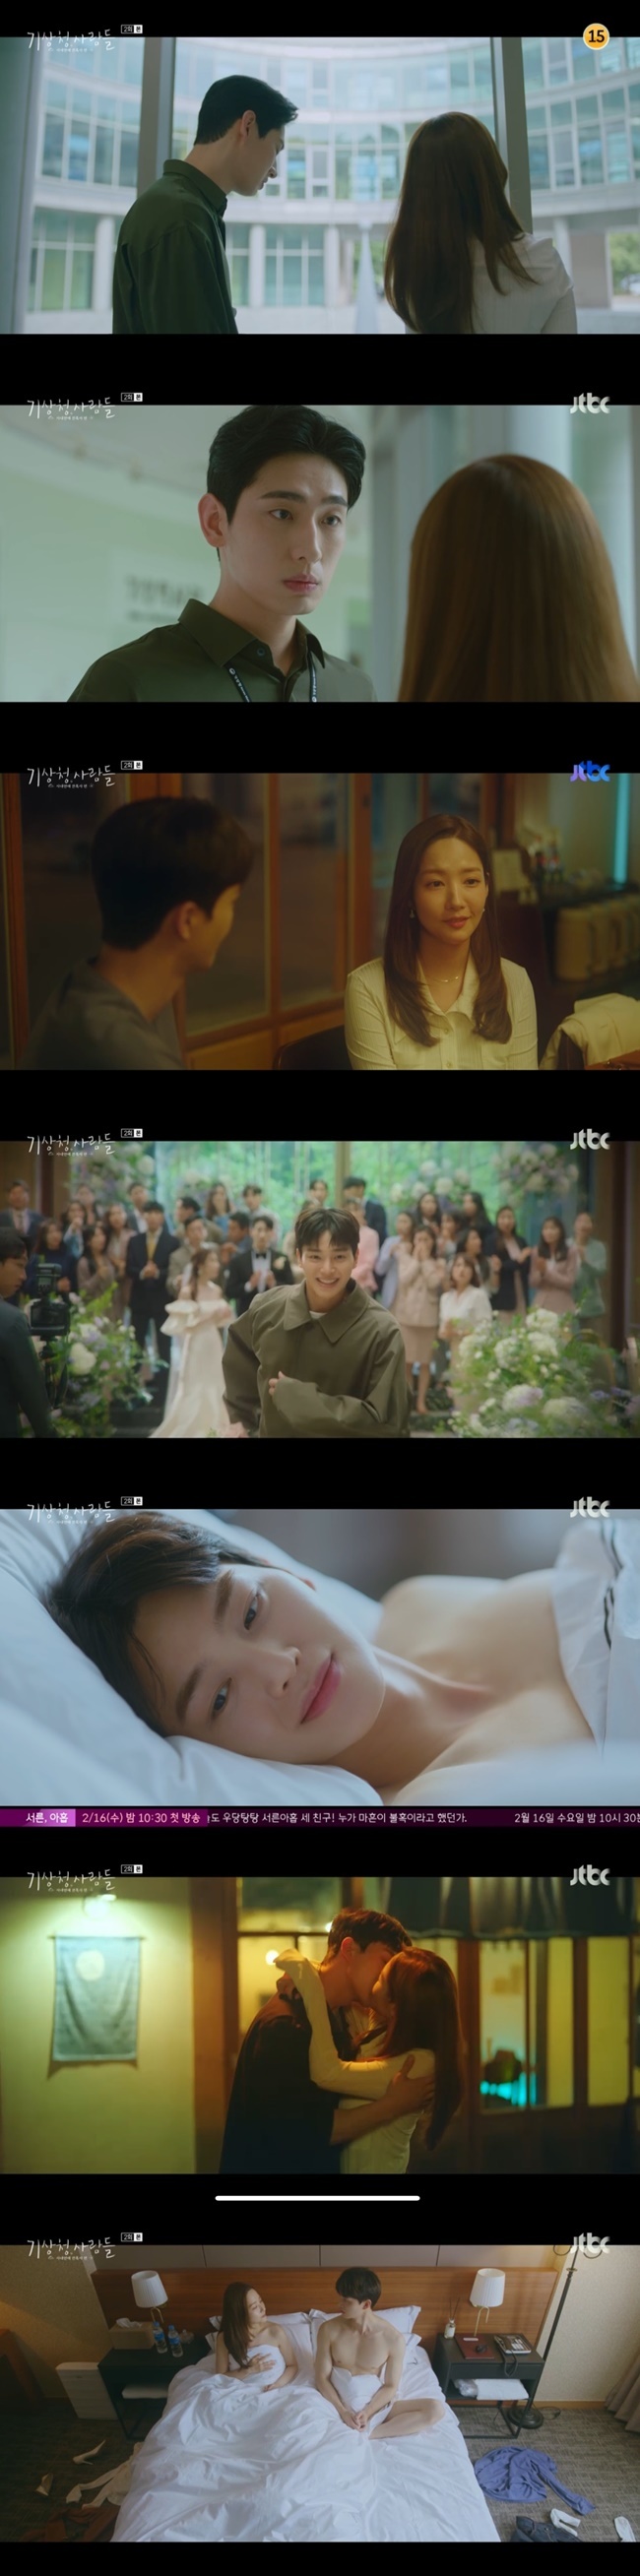 Park Min-young has had a hot night with Song Kang.In the second episode of the JTBC Saturday drama People in the Meteorological Administration: The Cruelty of In-house Love, which aired on February 13, a full-fledged entangled figure of Jin Ha-kyung (Park Min-young), Lee Si-woo (Song Kang) was portrayed.Han Ki-jun has shamelessly demanded that the apartment price of the joint name promised to be given as alimony has risen and Lets share it half and half.Han Ki-joon, who takes out the apartment story every time he meets at the main office, said, Television, induction, and home training equipment are all back to the original.I know it wont be easy, he said.At that time, her sister Jin Tae-kyung (Jung Un-sun) said, Han Ki-jun sent proof of the contents, saying, My mother is jumping and running now. Jin Ha-kyung, who heard this, could not stand his anger and went to Han Ki-jun.Jin Ha-kyung slapped Han Ki-jun and said, Is it uncomfortable for others to see? Then you should not have done it. Have you forgotten what you did to me?Han Ki-jun said, Thats it, thats the apartment. I said Im sorry. I have to tell you a few more times.The two eventually complained about the complaints they had accumulated in front of the company people. When Jin Ha Kyung showed tears, Han Ki-joon said, Answer how much you will give.Its 10 years, but youre not going to eat it all alone. Jin said, I sold my house and said that your stake in the house is only 7%. I will also deposit the remaining amount of money to deduct my money that I bought and bought in Korea.I like it in half, and there is a degree of shamelessness. Jinha, who was worried about dispatching Switzerland, decided to stay in the main office and said, Do not pretend to know me in the future.Lee Si-woo, who watched all of them, said, I know a good place to go when I do this. Jinha Kyung drank alone with Lee Si-woo.Jin Ha Kyung laughed, I do not drink well because I am a little drunk, and Lee Si-woo asked, You got involved with him because of alcohol.Jin Ha-kyung said, I was a couple of Han Ki-jun and CC (campus couple), and I decided to keep it secret because my seniors could not do it in-house. I drank alcohol at the new welcome party and I opened it first.Jin wondered about the wedding bouquet case that Han Ki-jun had said, Lee Si-woo ran away from Han Ki-jun, who took the bouquet instead of the person who originally decided to go to Chae Eugenes wedding.Lee Si-woo laughed, Some people have intercepted other women, and this is a medicine, and Jin Ha Kyung said, It is a real brute.Lee Si-woo said, Eugene really liked it a lot, but once I was shaking, I was happy. Eugene is a huge shit.Maybe it is the same context that Eugene picked Han Ki-jun, and Jin Ha-kyung also talked about the disadvantages of Han Ki-jun.With Han Ki-jun and Chae Eugene talking, they became very close. Jin Ha-kyung thanked Lee Si-woo and said, I do not do in-house love again.I have no company again in my life, never. The next morning, Jin Ha Kyung woke up and sweated when he saw Lee Si-woo lying next to him.The two people who had been drinking together the night before spent a night sharing a hot kiss. Jin Ha Kyung, who recalled it, said, Last night was an incident, happening.It is like a natural disaster that should not happen, and it is like a lightning strike formed by meeting two air currents that should not meet. Lets just forget about us coolly.Im going back to the metropolitan area and Im going to be all in. I know what you mean, Lee said.Lee Si-woo, who heard this, laughed comfortably, saying, I will not return. He said, I was officially issued as a team 2 from next week.